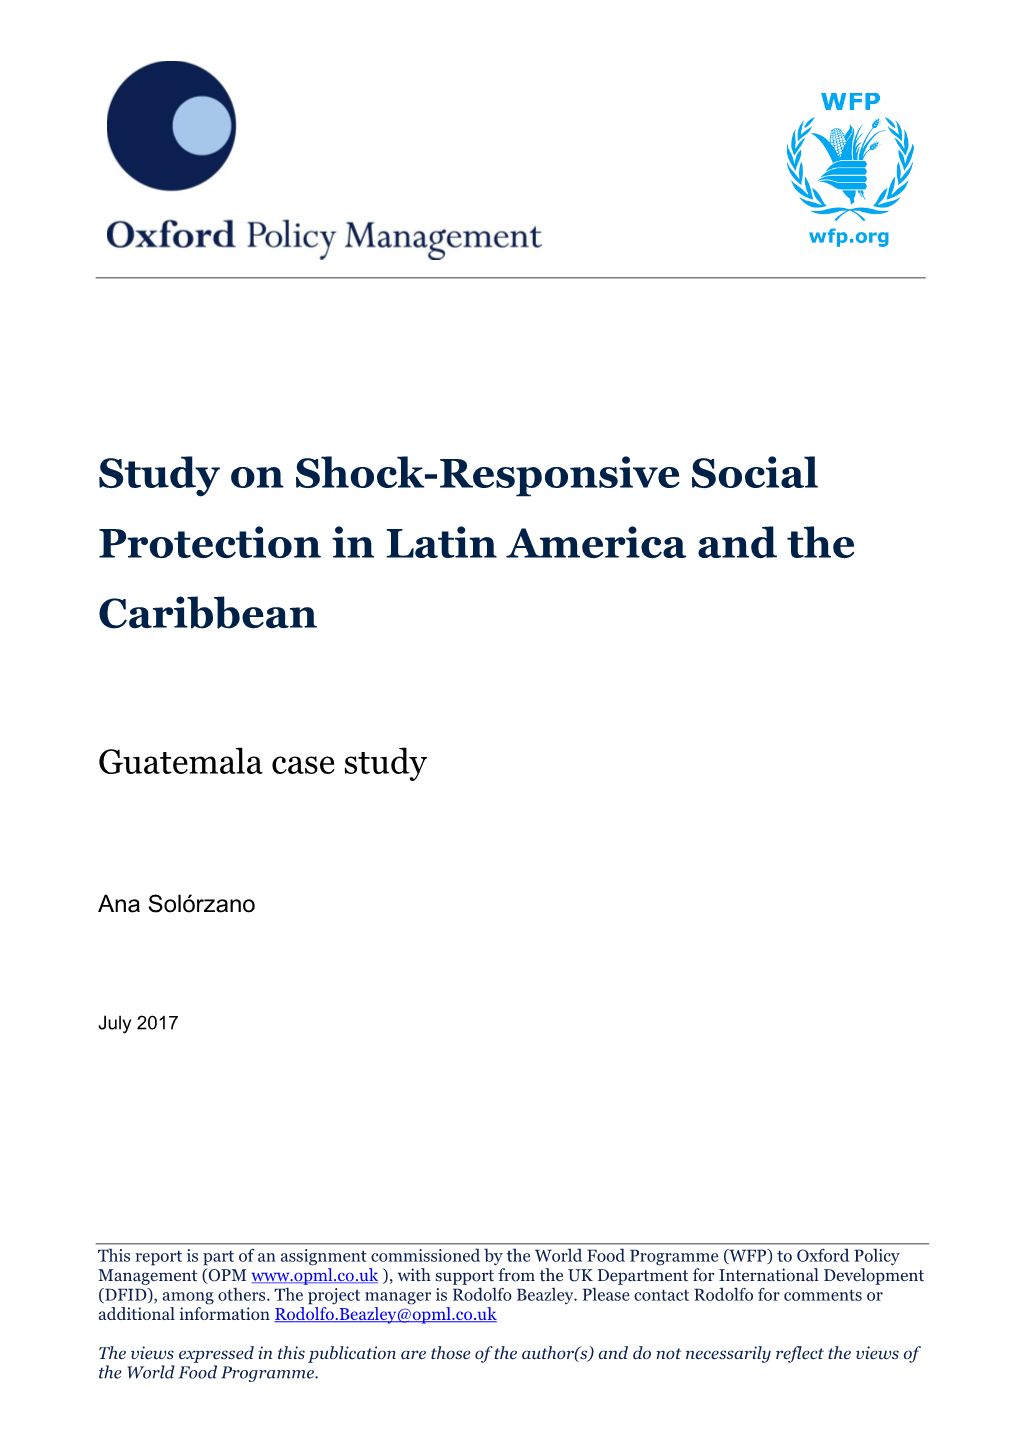 Study on Shock-Responsive Social Protection in Latin America and the Caribbean